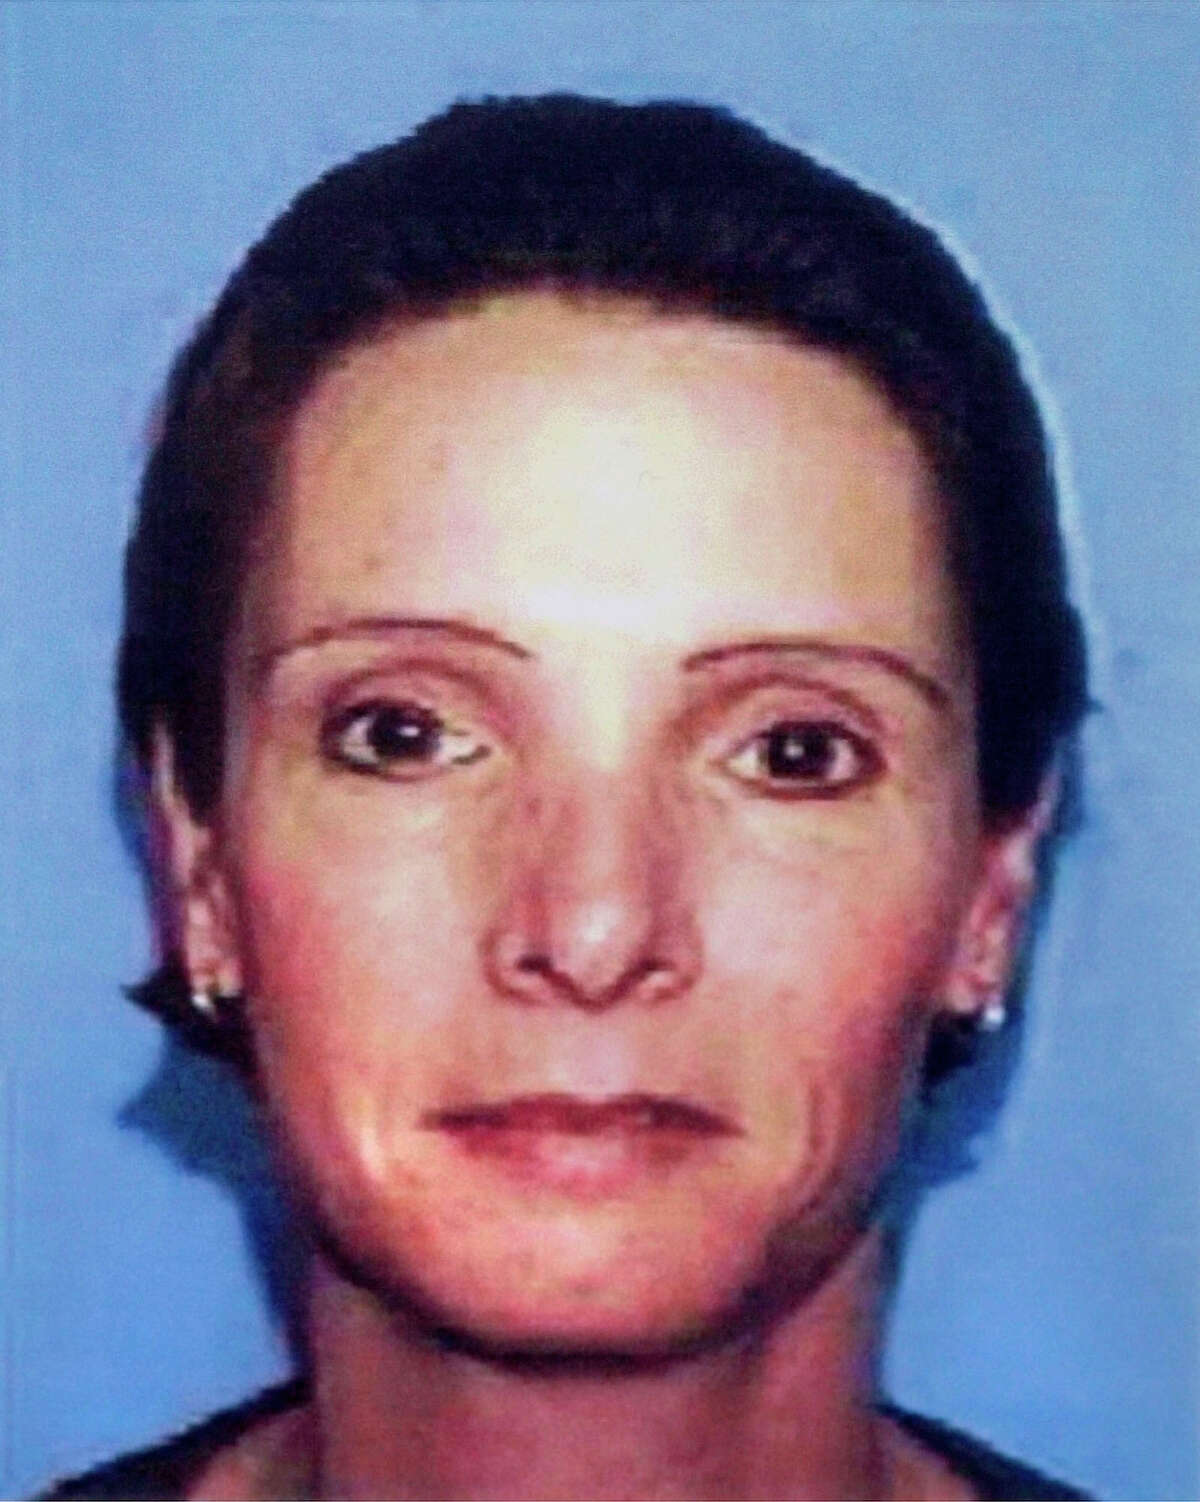 Brenda C. Heist is shown in this undated drivers license photo distributed by police in 2002. Heist, a woman who surfaced 11 years after disappearing and leaving behind her young children was released from police custody on Wednesday, May 1, 2013. (AP Photo/PA Dept. of Transportation via Lancaster Newspapers)